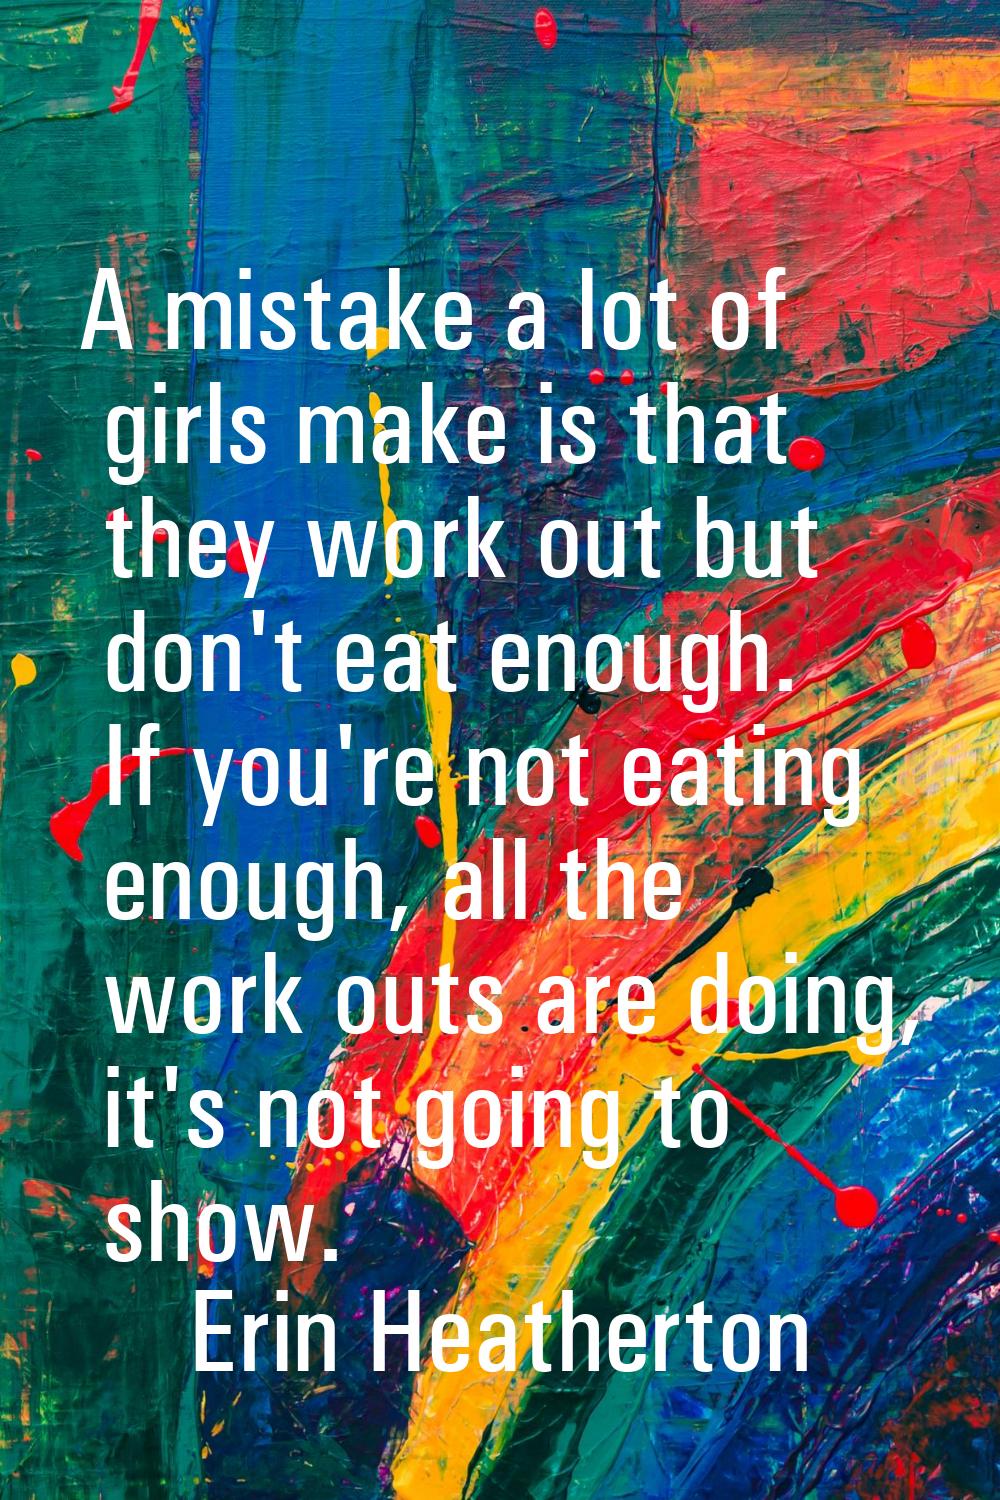 A mistake a lot of girls make is that they work out but don't eat enough. If you're not eating enou